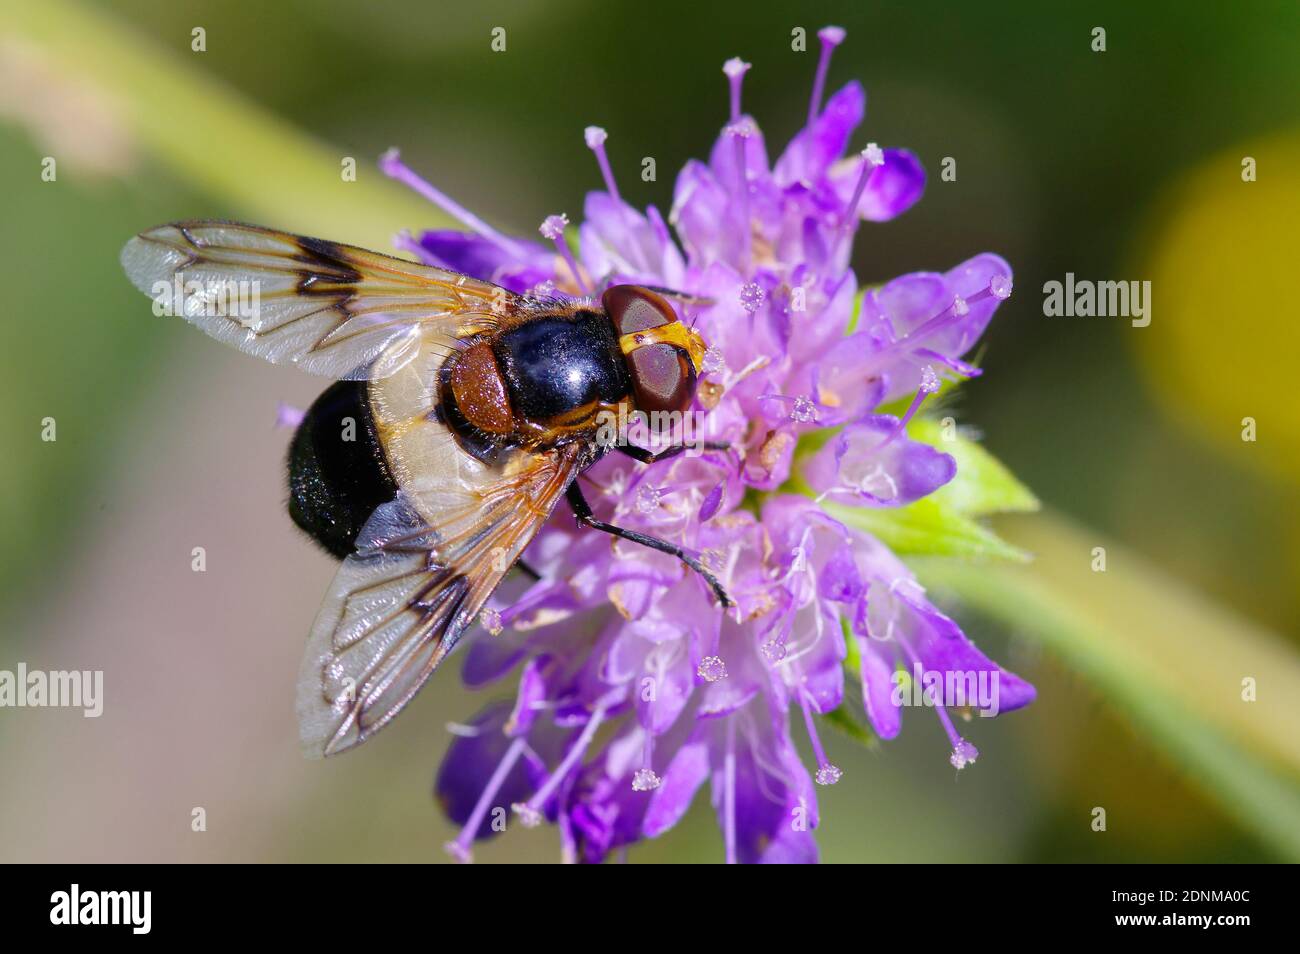 Hoverfly (Volucella pellucens) with large compound eyes on Small Scabious (Scabiosa columbaria) flower. Austria Stock Photo